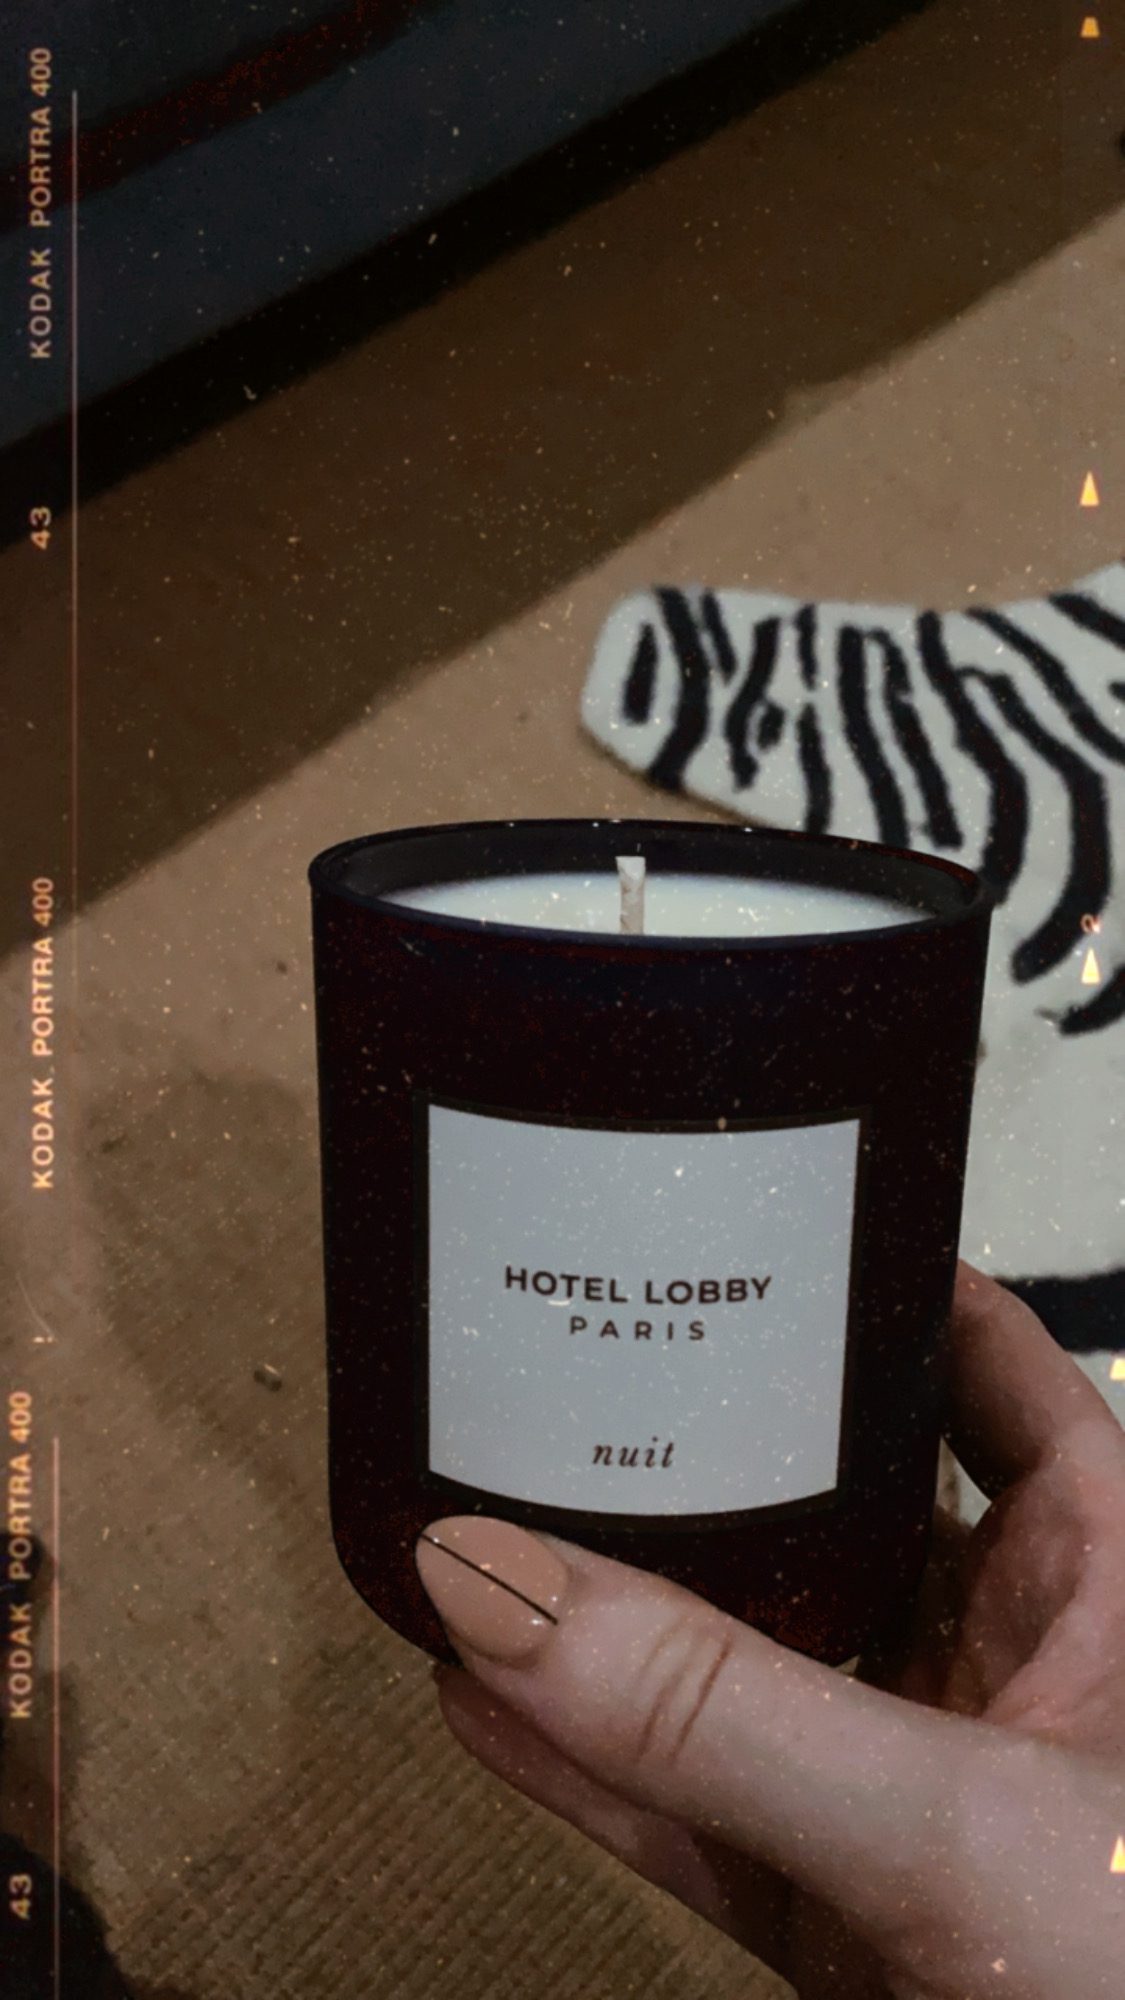 Hotel Lobby Nuit candle | Things Making Me Happy: 3.1.21